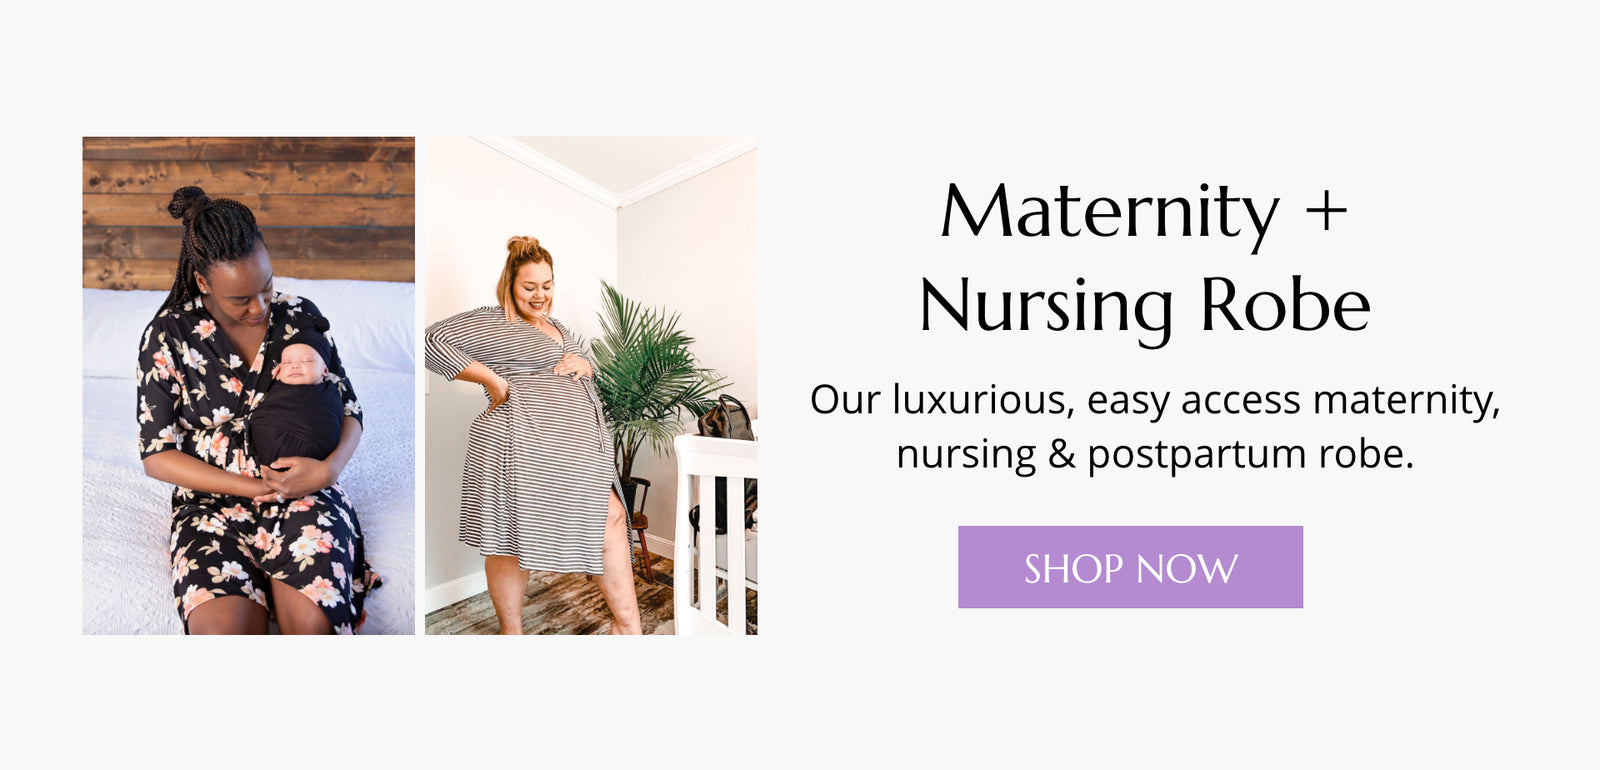 Kaftan Delivery Gown Plus Size Maternity Clothes Labor and Delivery Gown  Maxi Dress Nursing Nightgown Teal Floral Gown With a Draw String. 